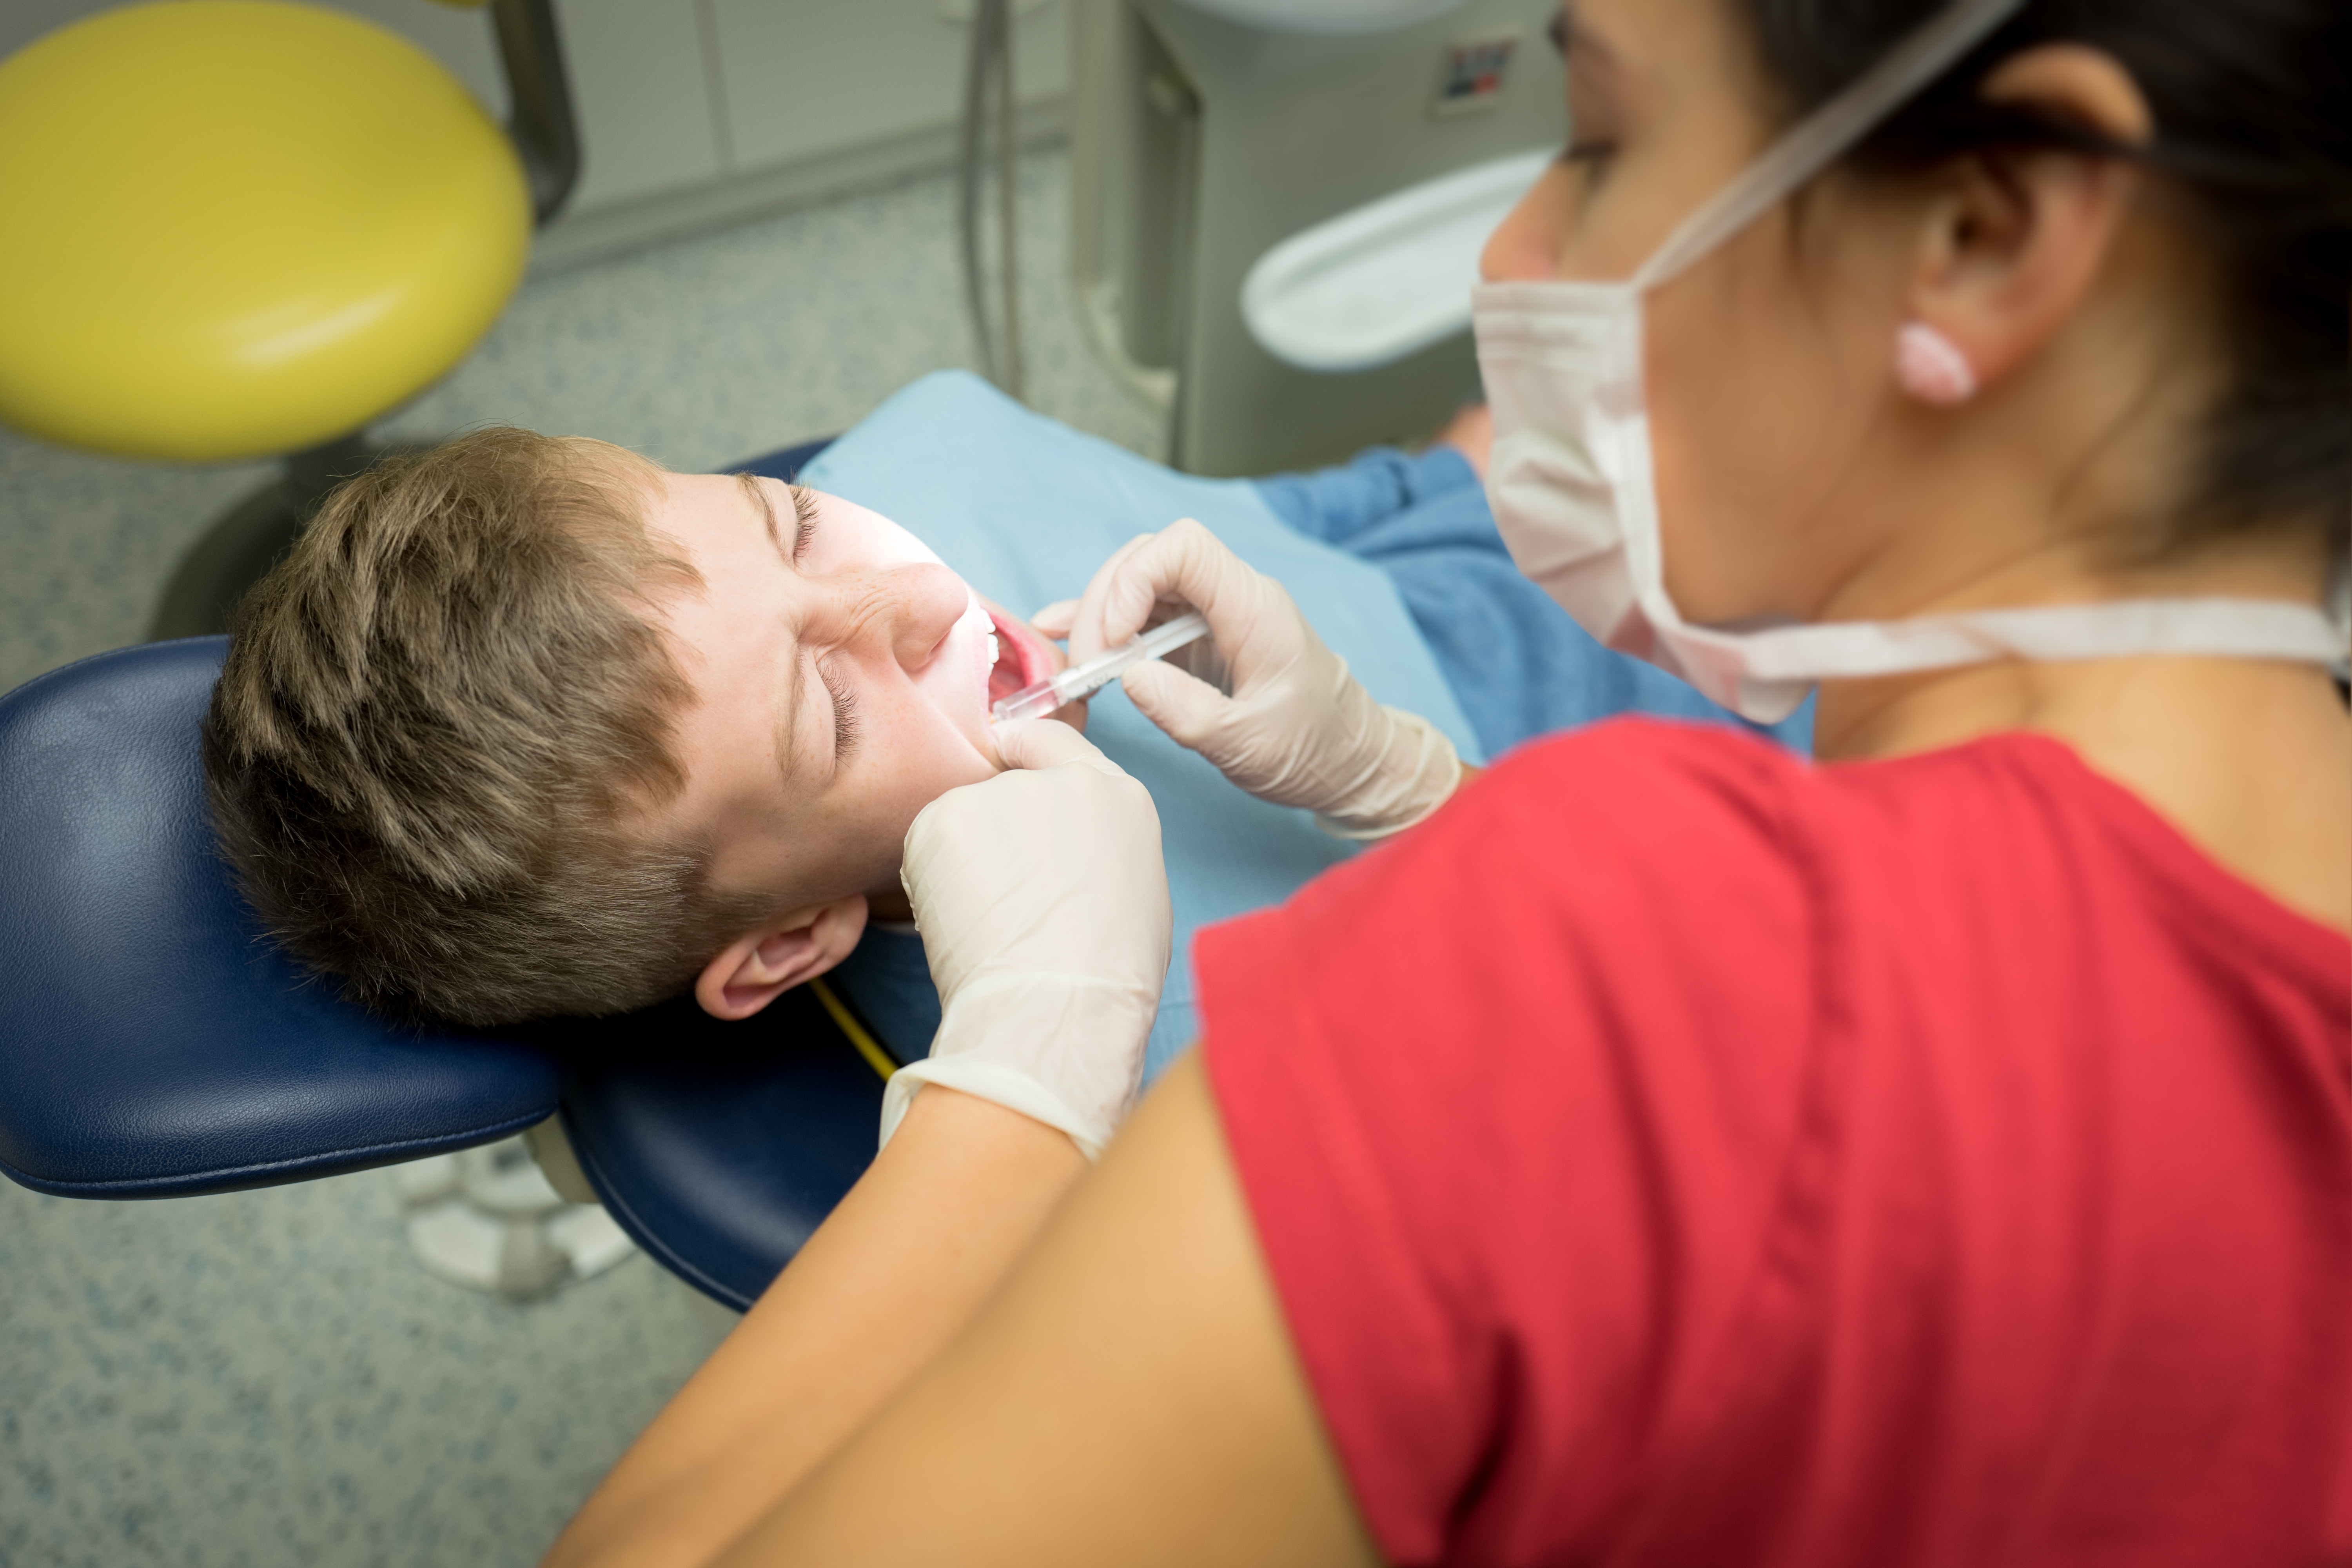 A child getting anesthesia treatment at the dentists office